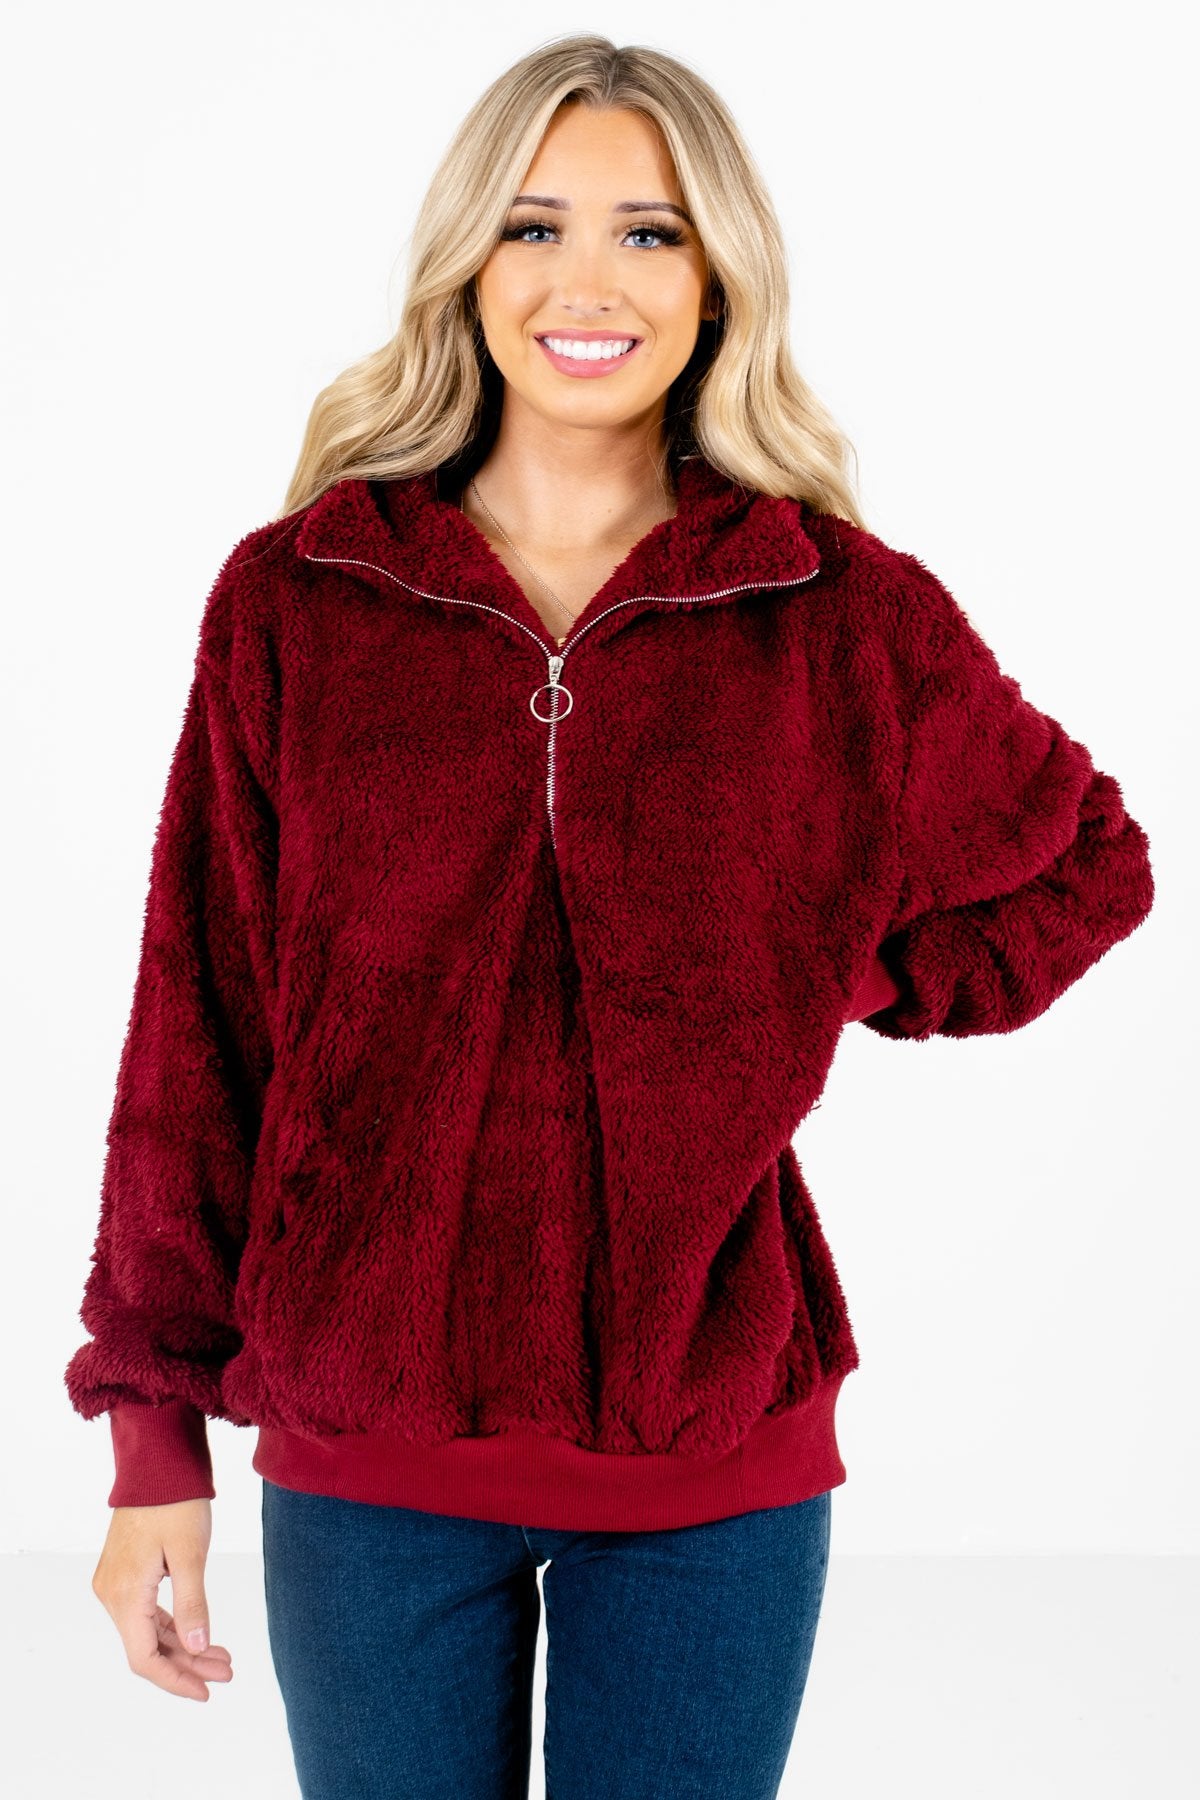 Women’s Burgundy Long Sleeve Boutique Pullover